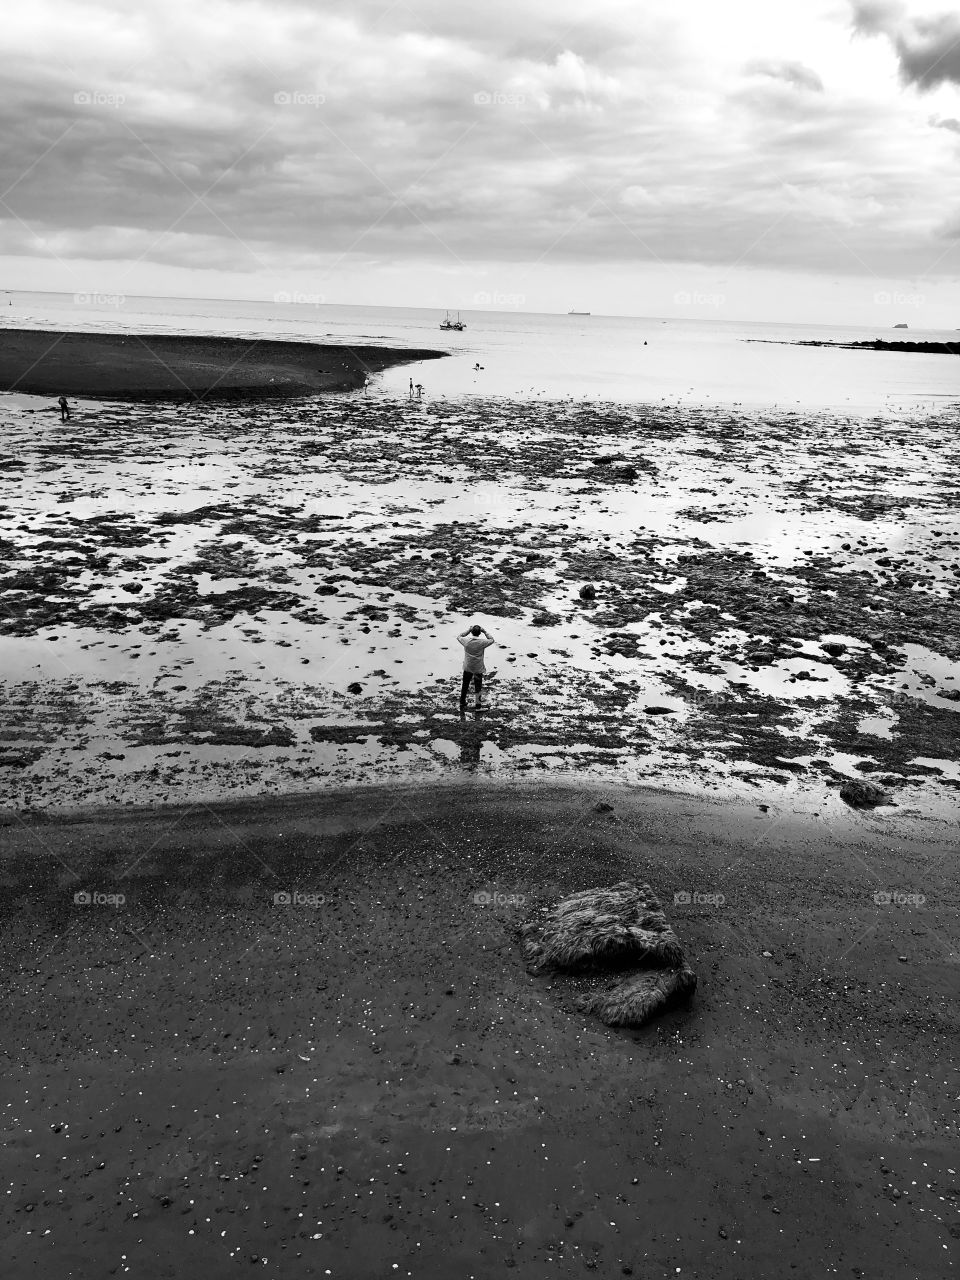 For this photo about an individual breathing life into an otherwise slightly bleak beach call, it’s rather better formed in black and white l felt, because the b and w effect captures the drama very well.